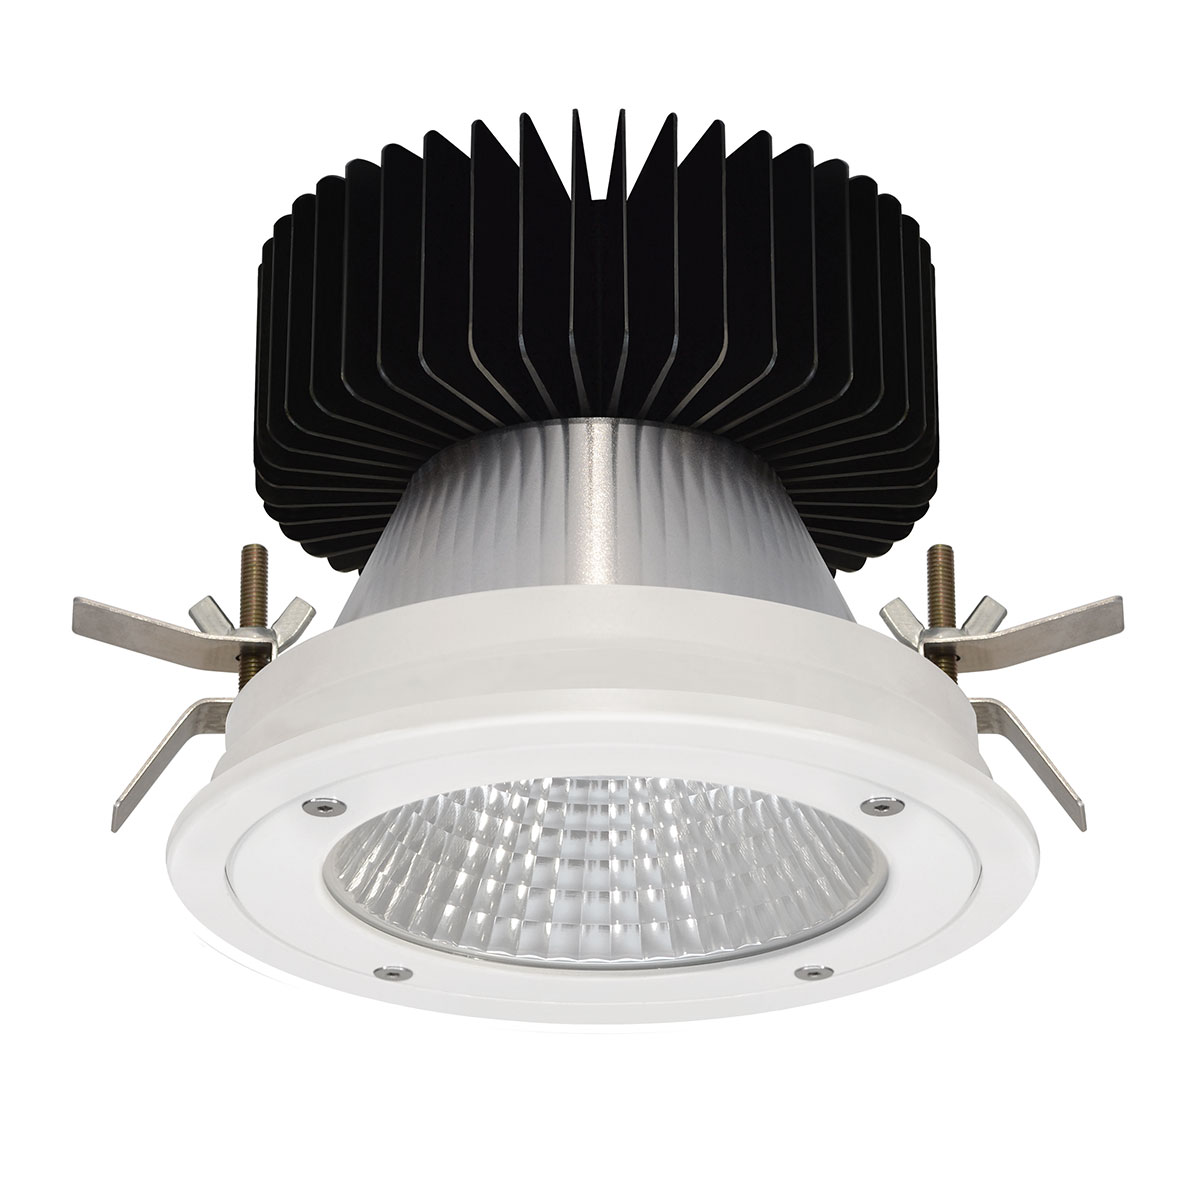 Kopa 22W Anti Tamper Fixed Round Recessed Downlight IP65 Rated 38° Degree Reflector White